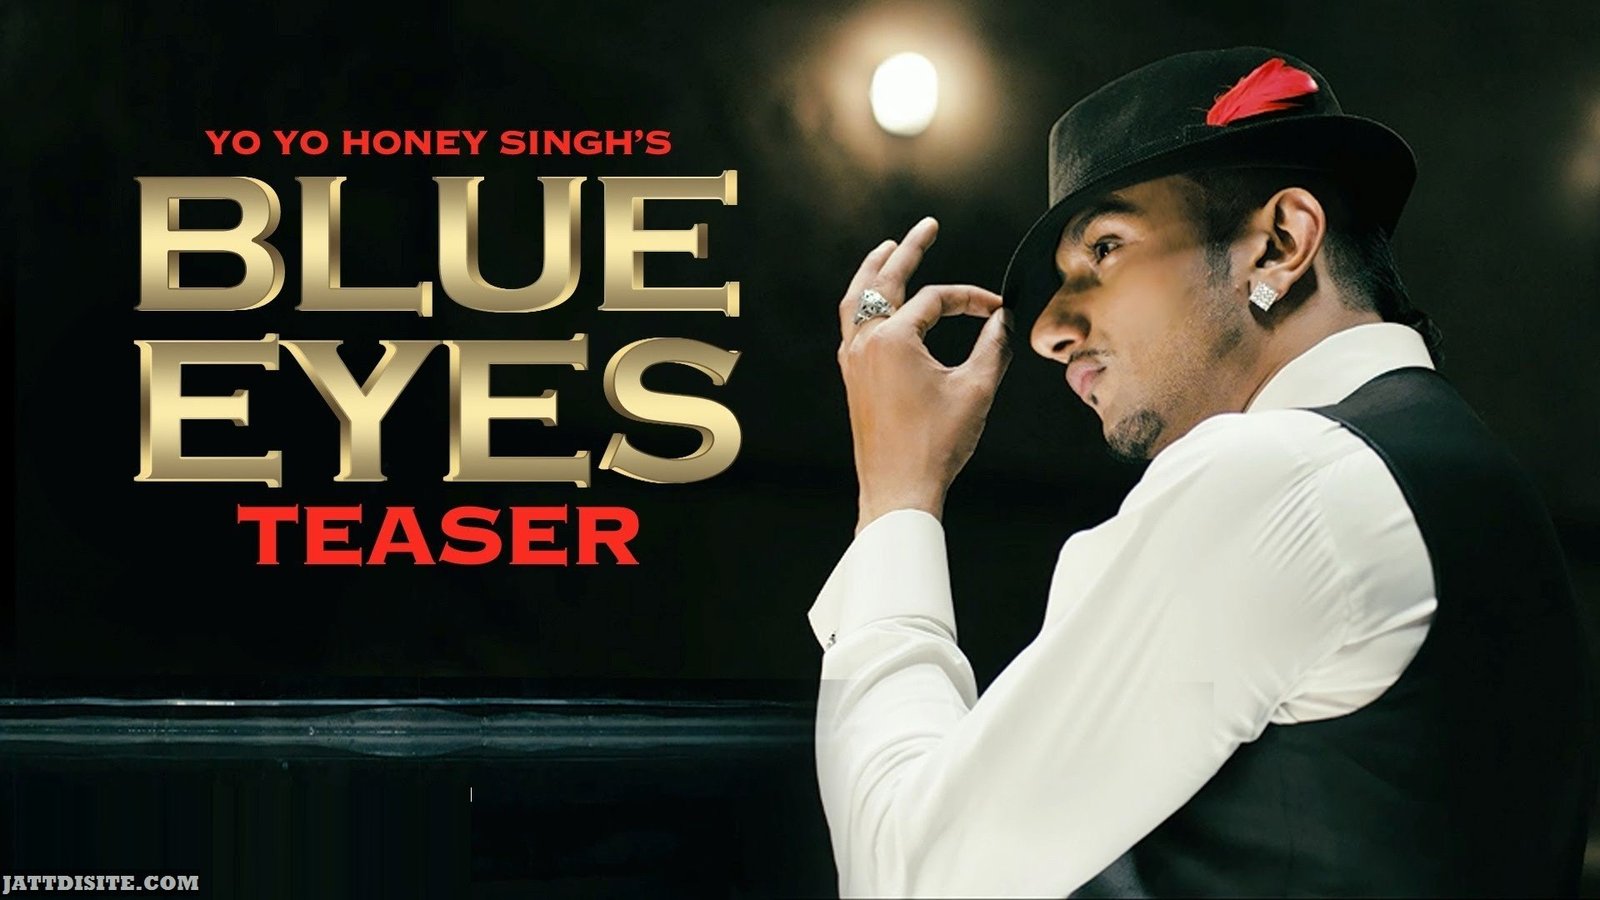 Honey Singh On The Cover Of Blue Eyes 